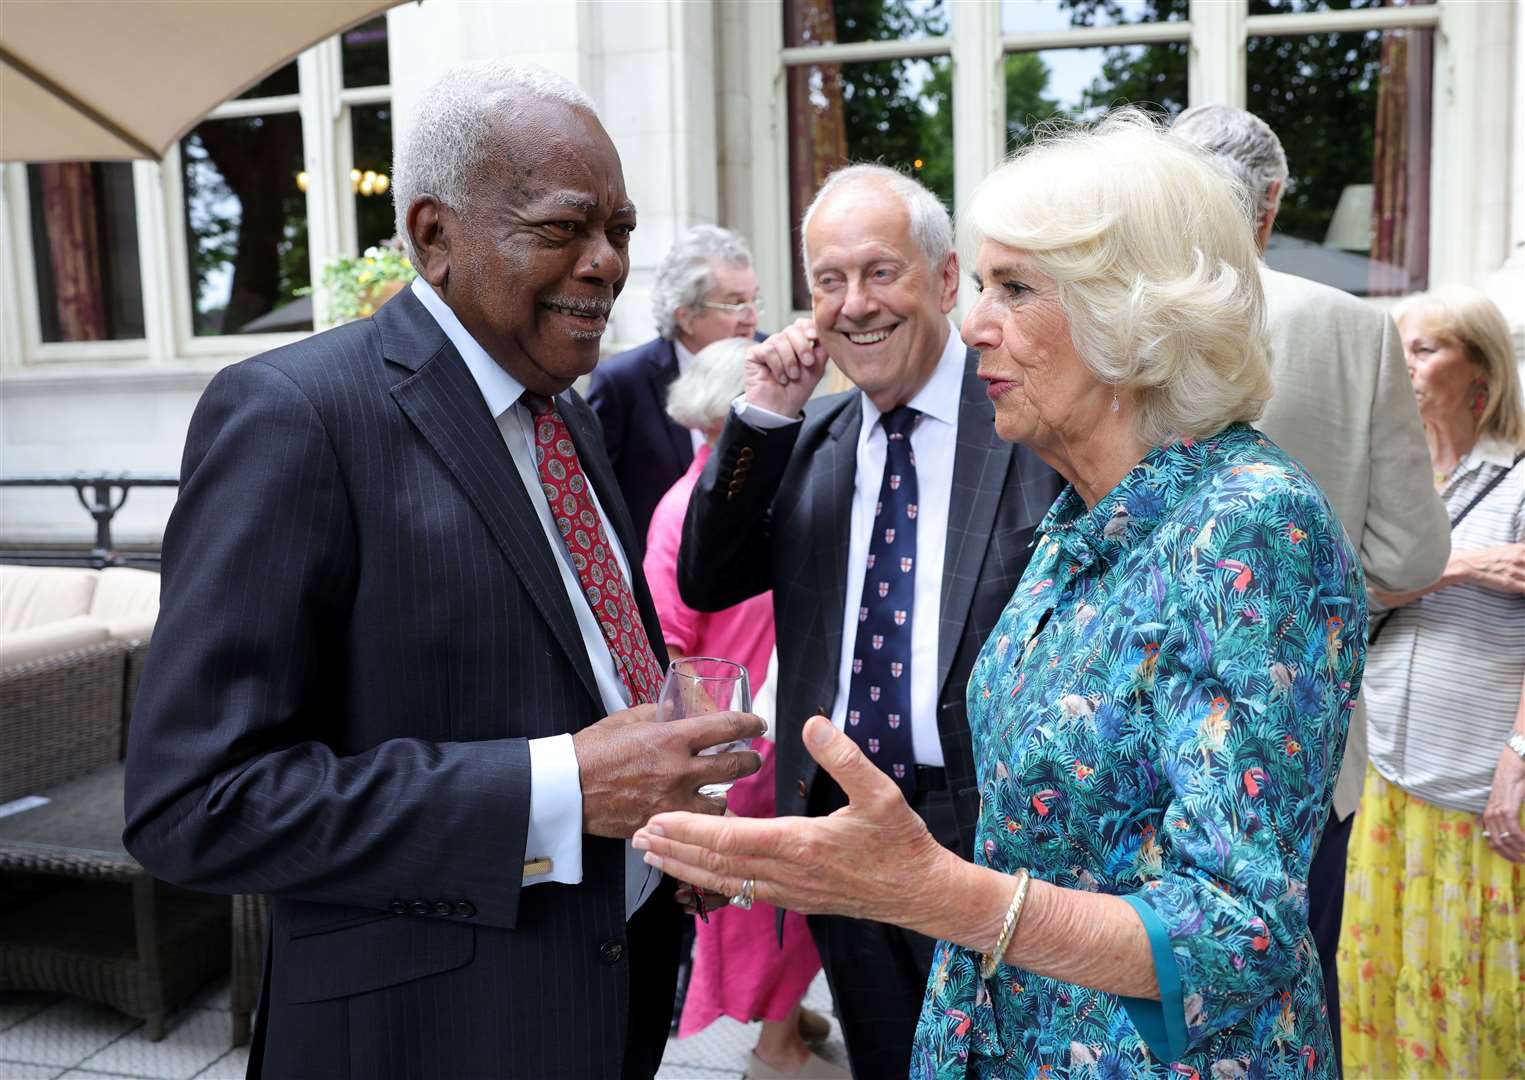 The Duchess of Cornwall with Sir Trevor McDonald during The Oldie Luncheon (Chris Jackson/PA)